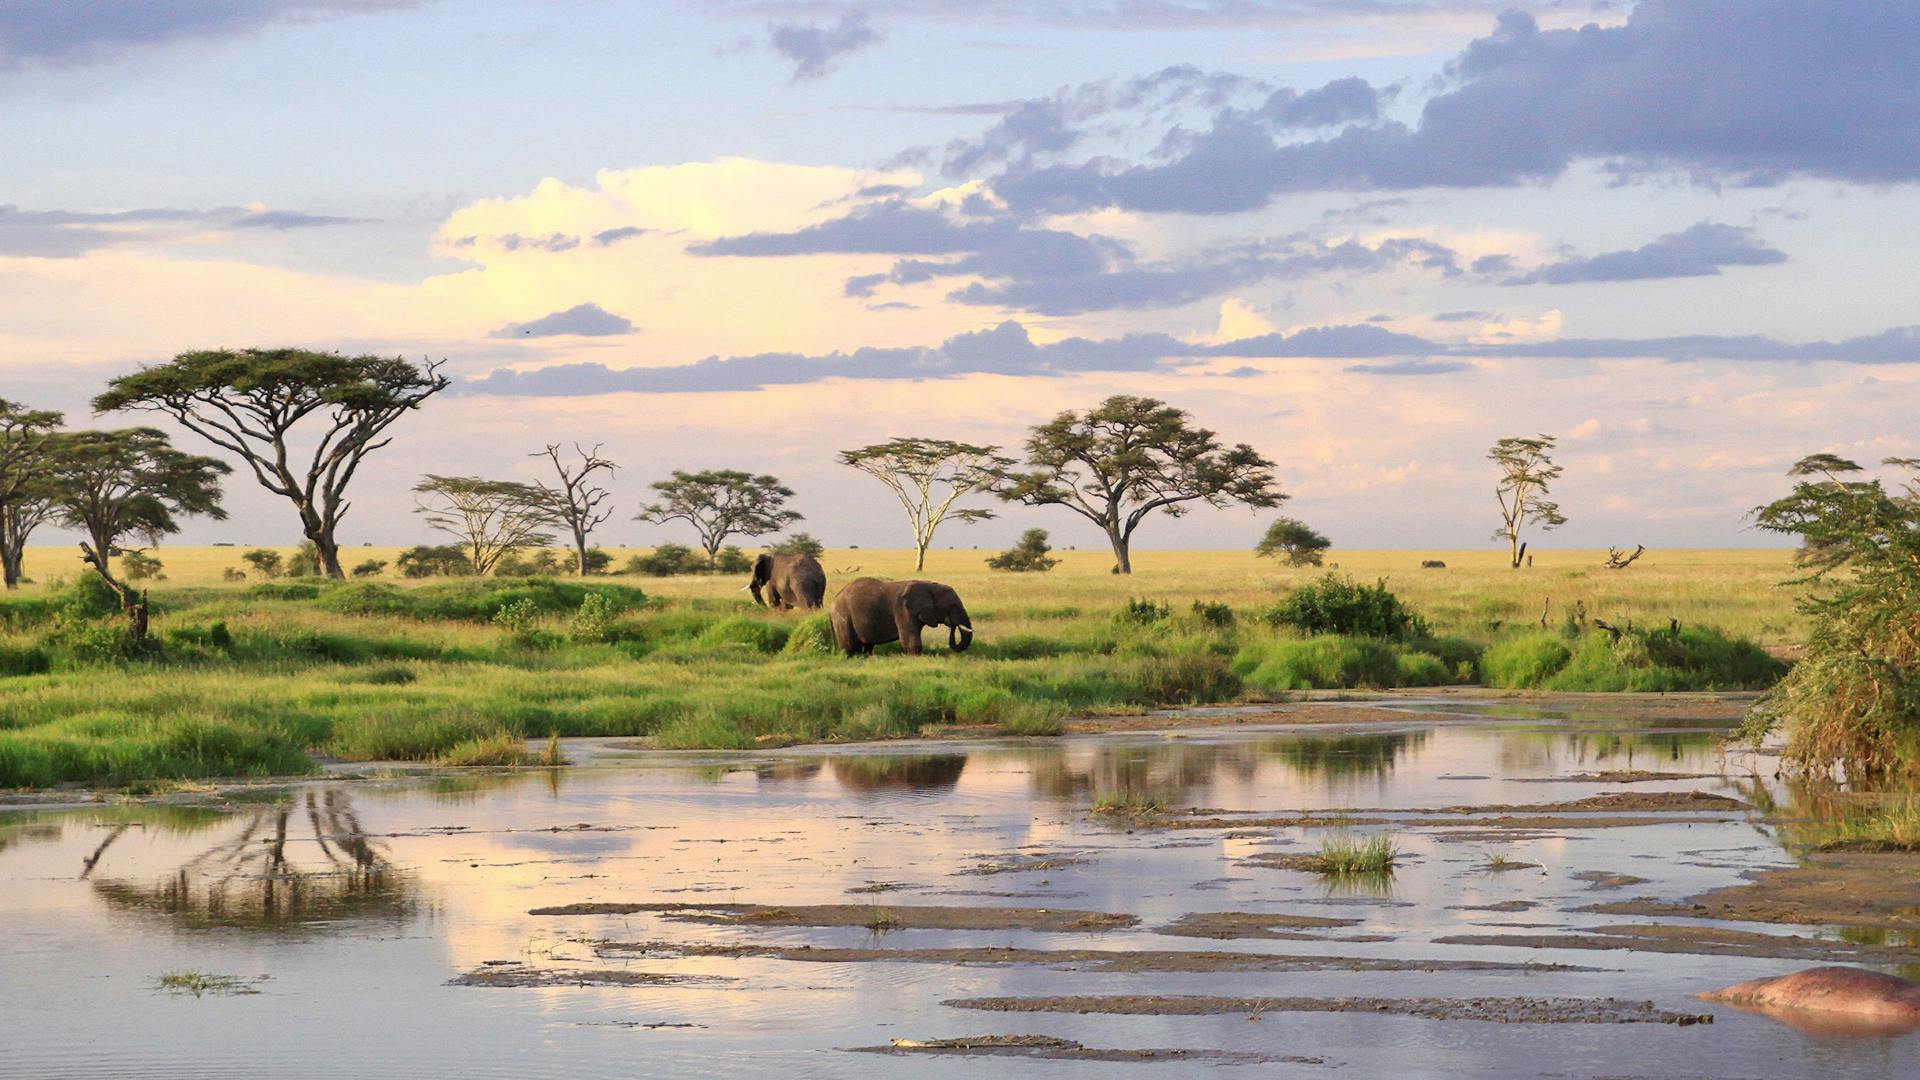 Northern Tanzania's striking landscape only comes second in grandeur to its immense variety of wildlife.